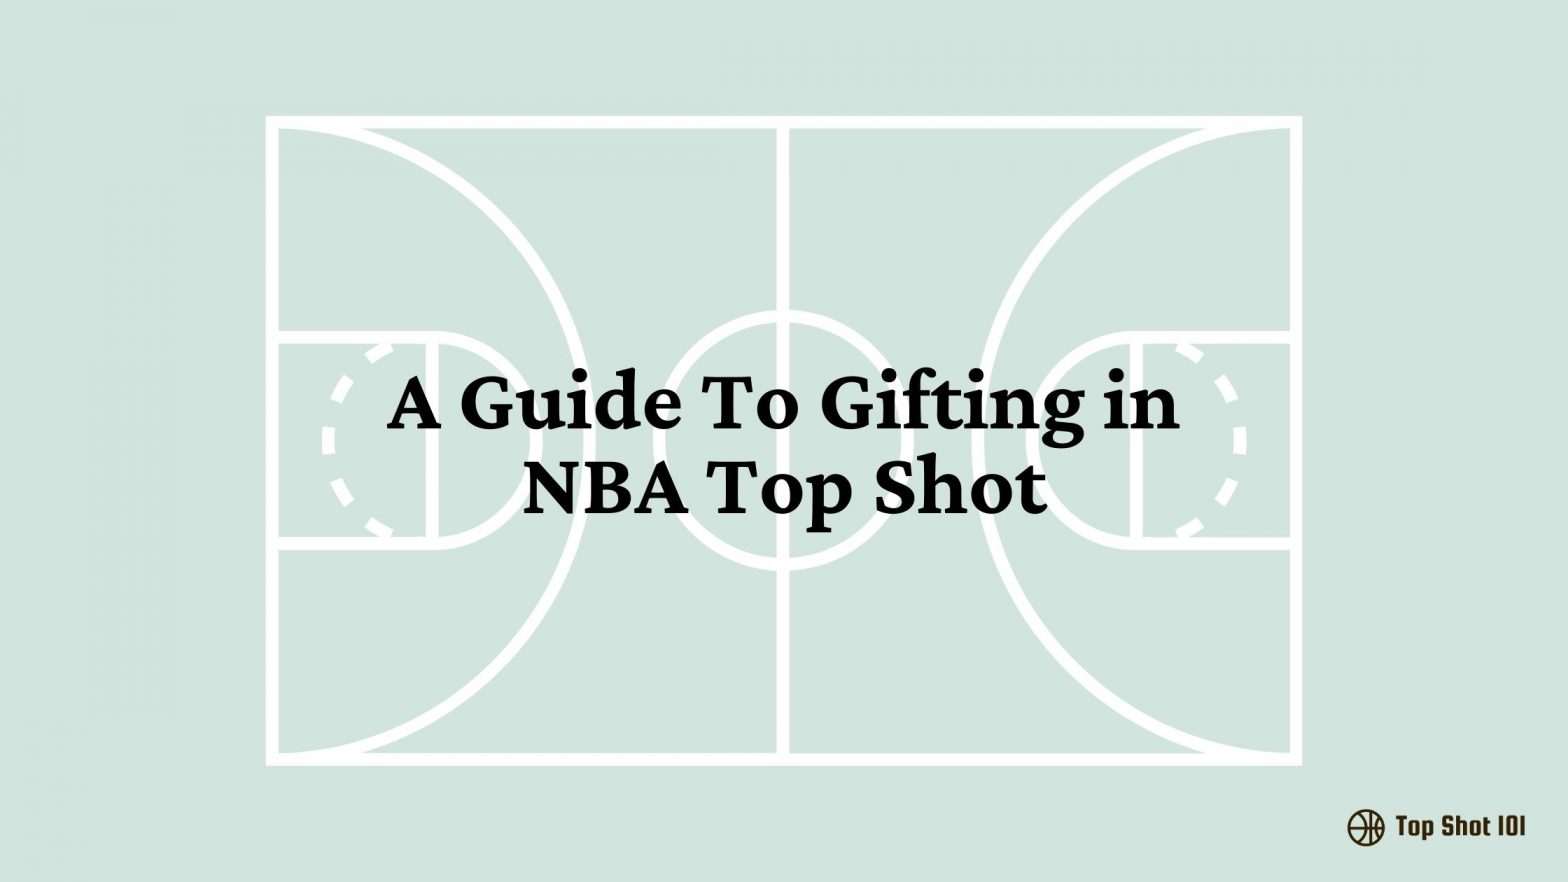 A Guide To Gifting in NBA Top Shot